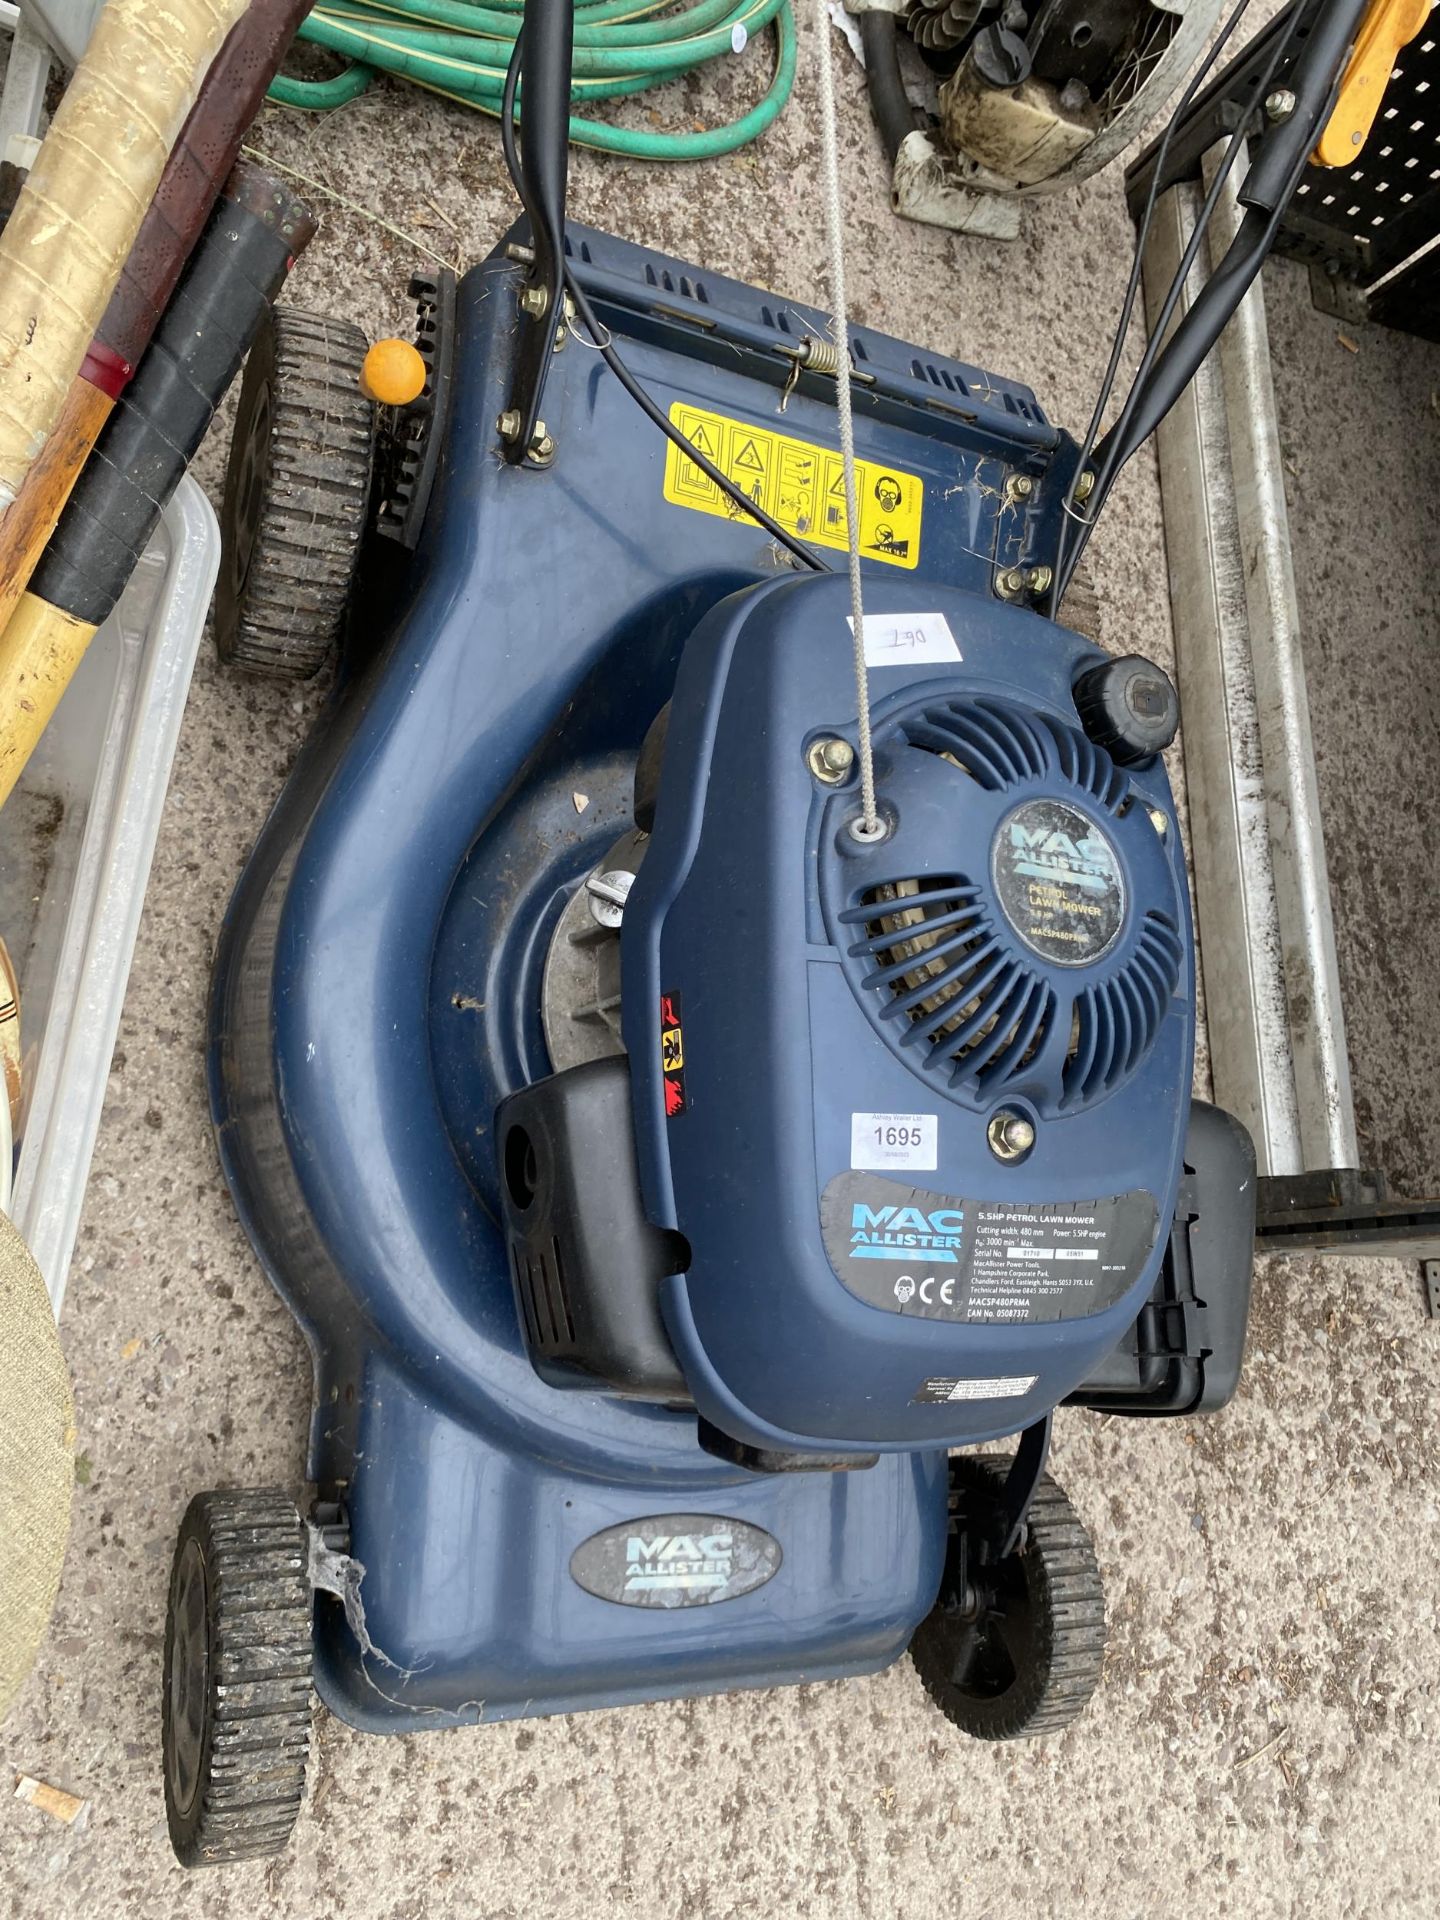 A MACALLISTER PETROL LAWN MOWER (LACKING GRASS BOX) - Image 3 of 3